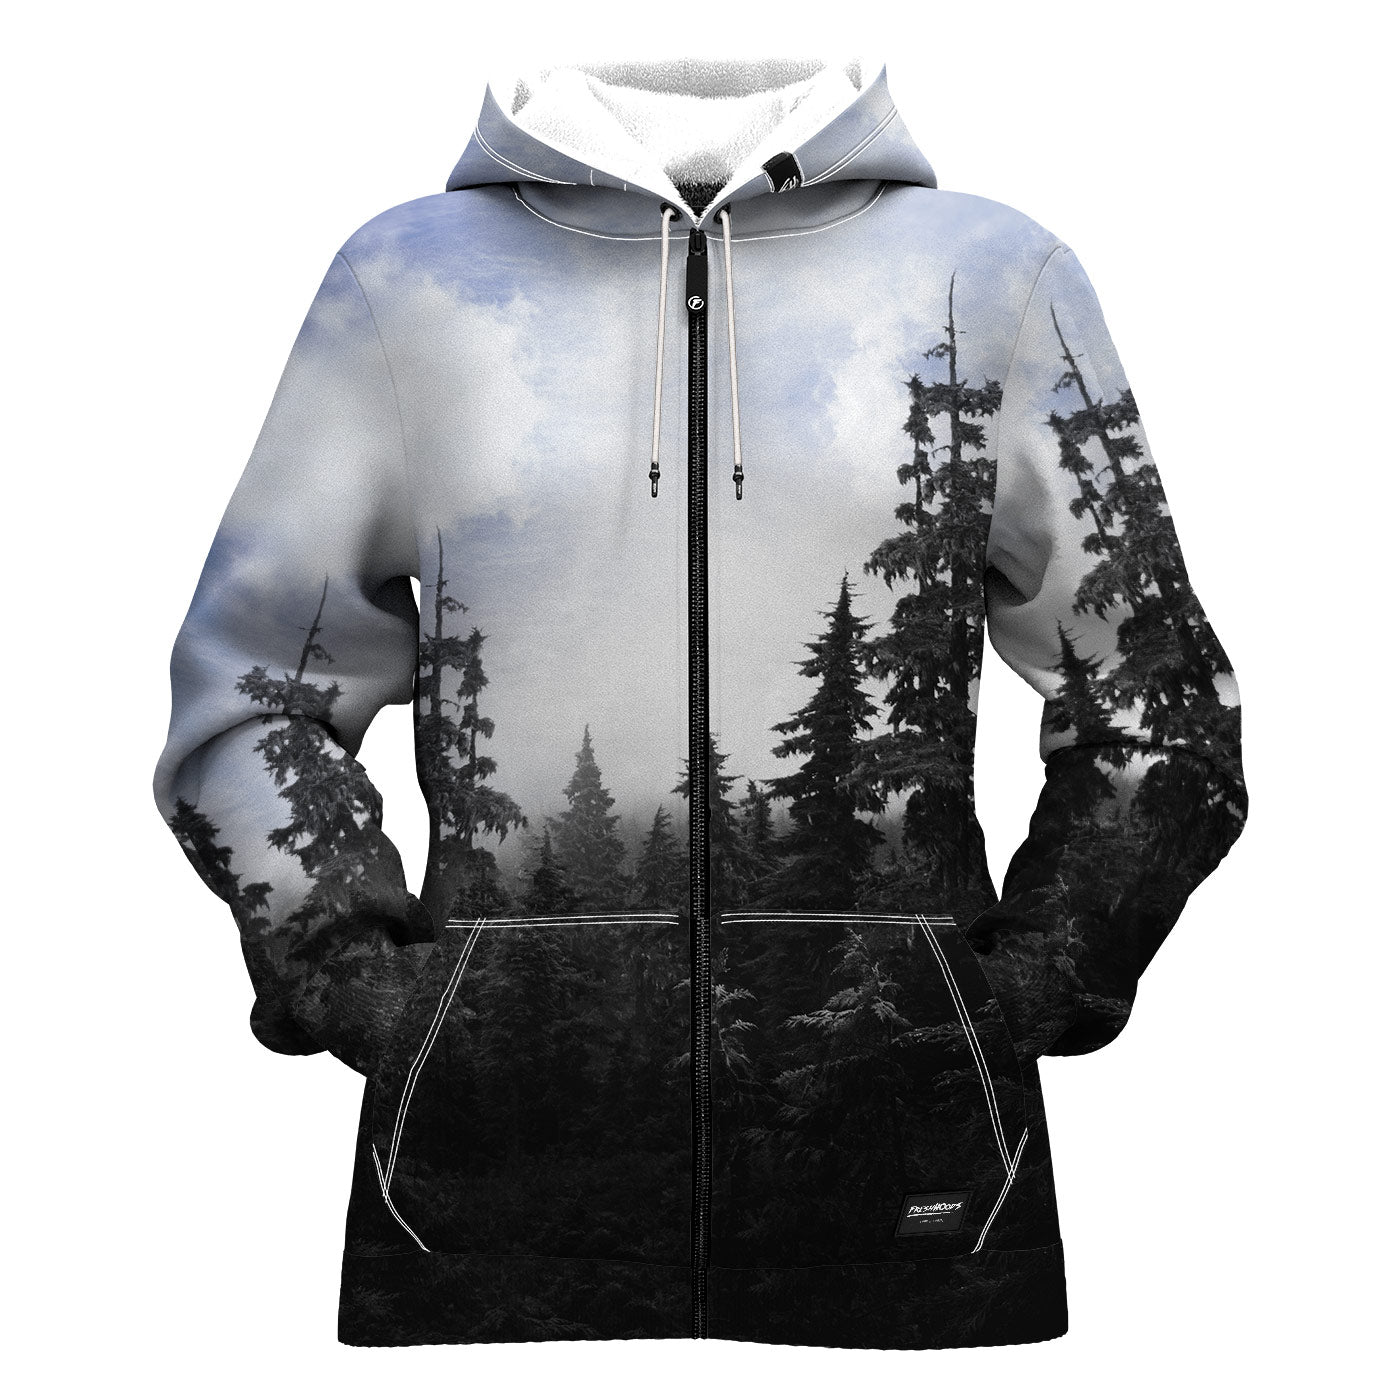 Chilly Morning Women Zip Up Hoodie